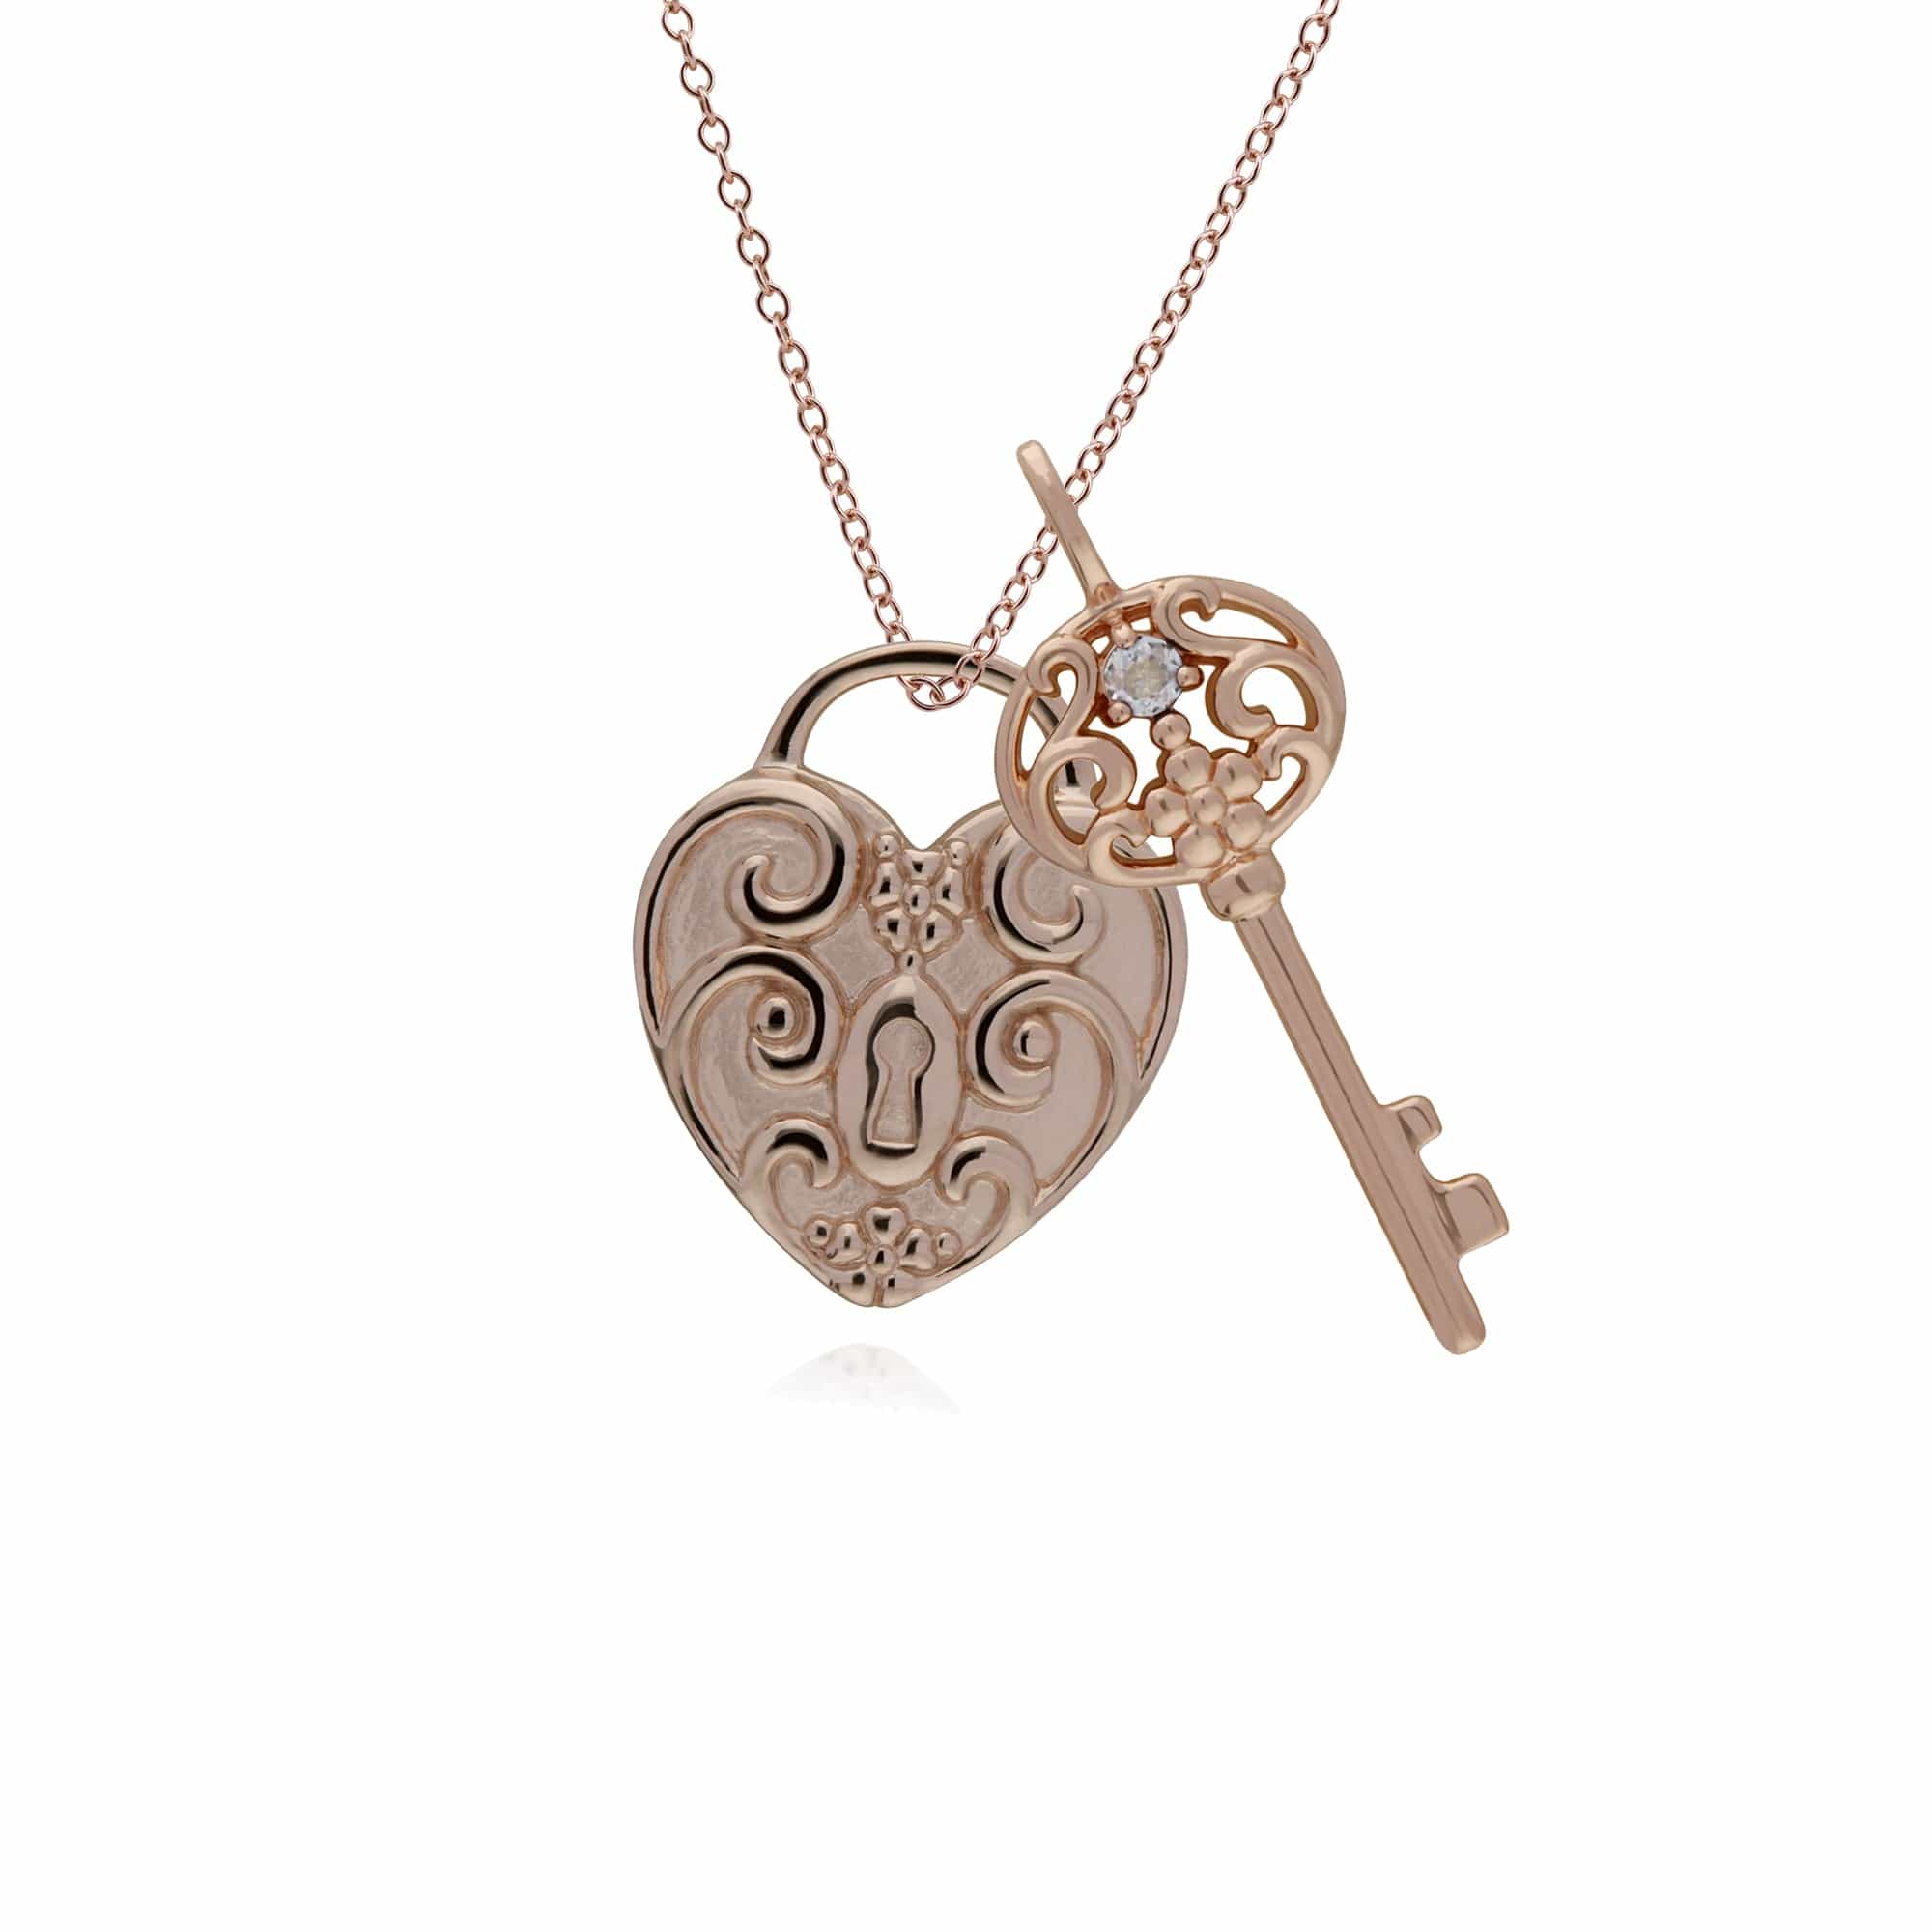 270P026711925-270P026501925 Classic Swirl Heart Lock Pendant & Clear Topaz Big Key Charm in Rose Gold Plated 925 Sterling Silver 1